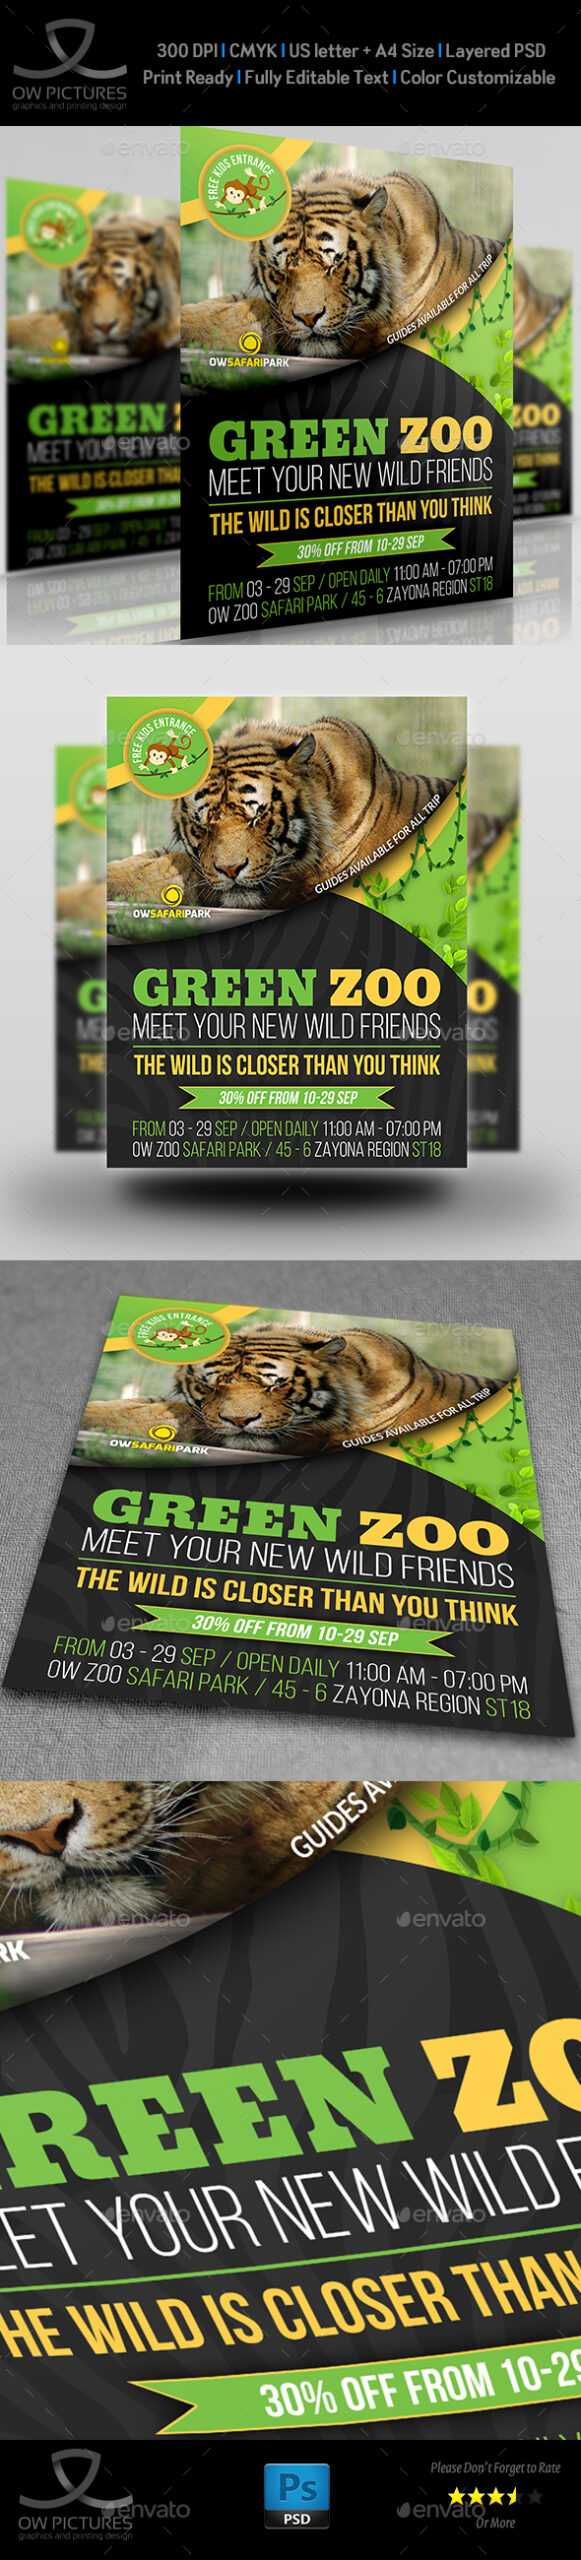 Zoo Flyer Graphics, Designs & Templates From Graphicriver Pertaining To Zoo Brochure Template